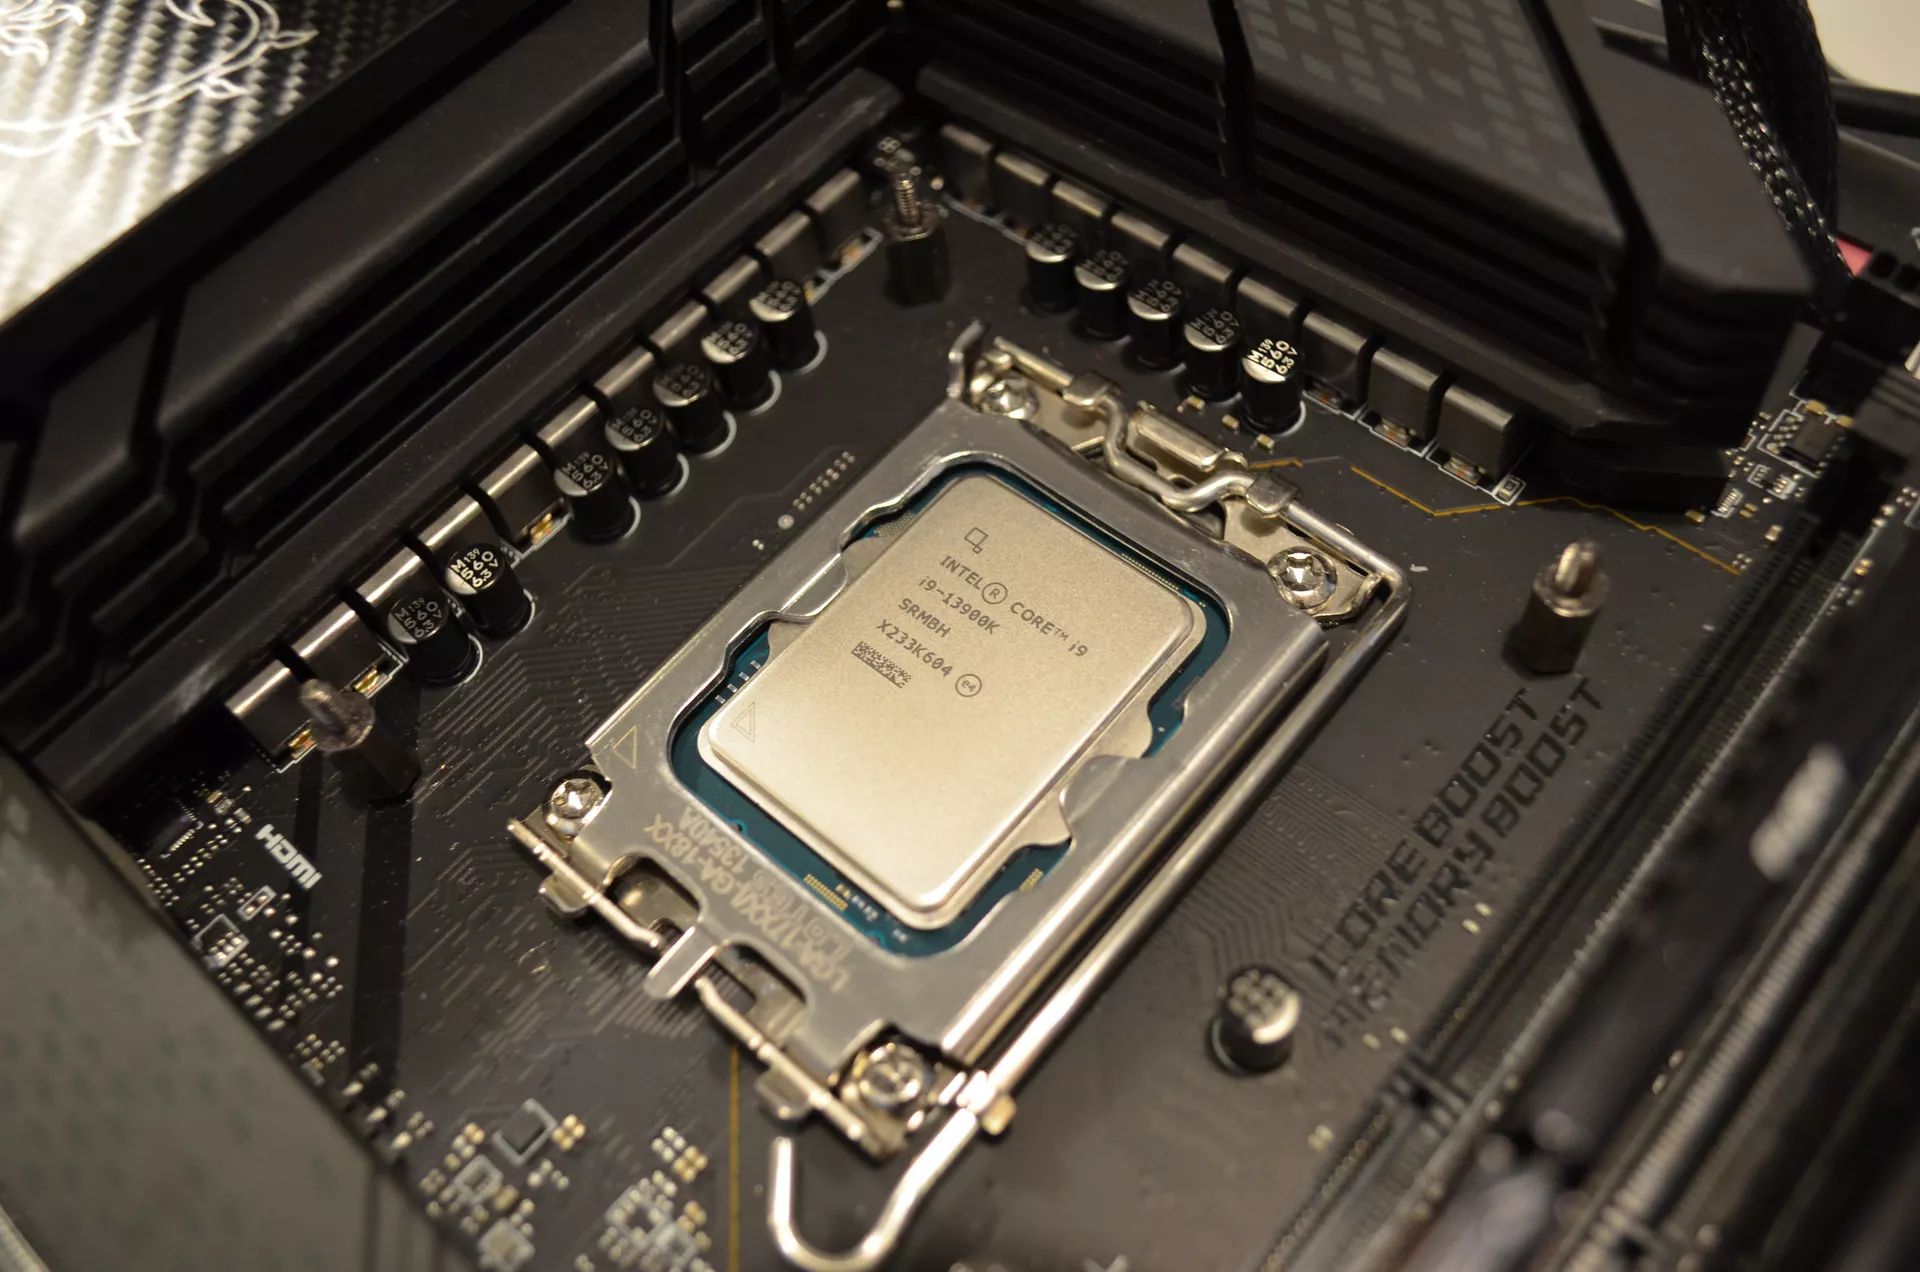 Intel’s new Raptor Lake Refresh processors are expected to be highly competitive – Intel